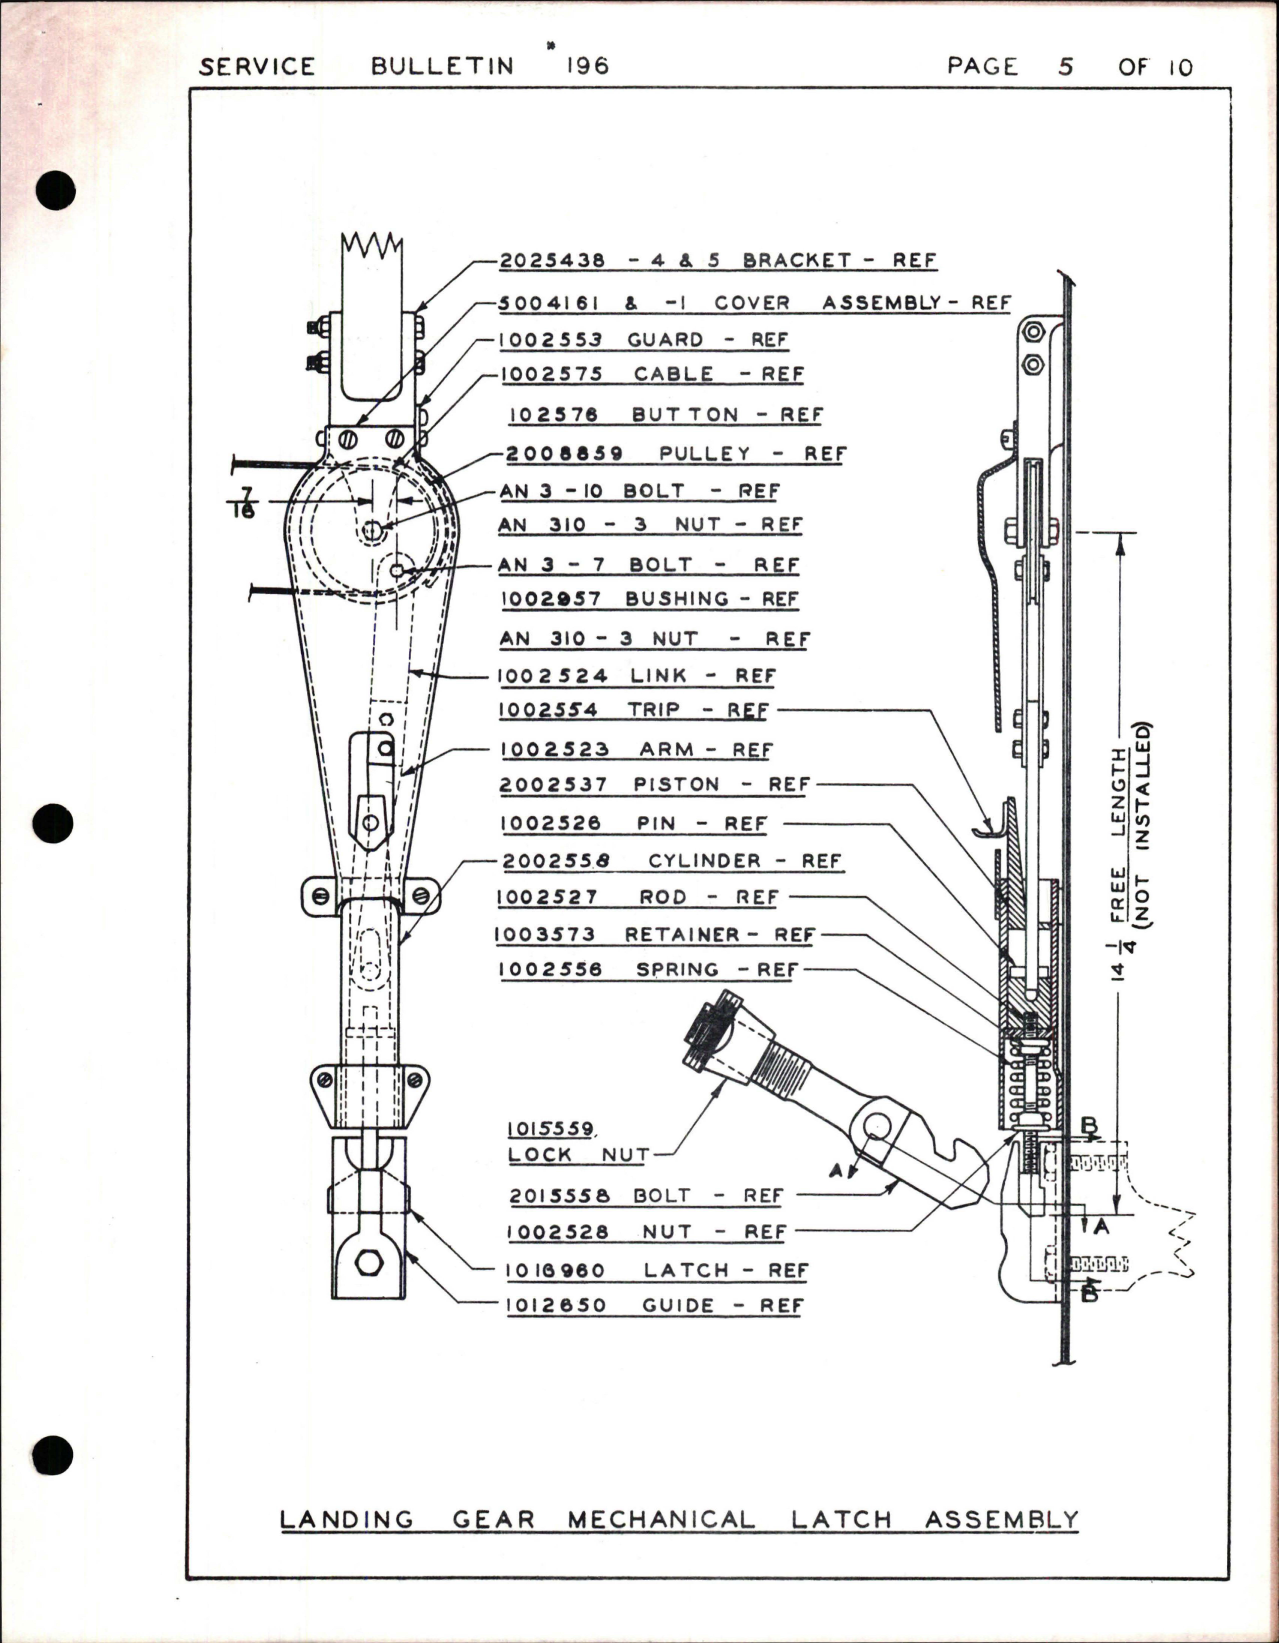 Sample page 5 from AirCorps Library document: Instructions for Adjusting the Landing Gear Mechanical Latch